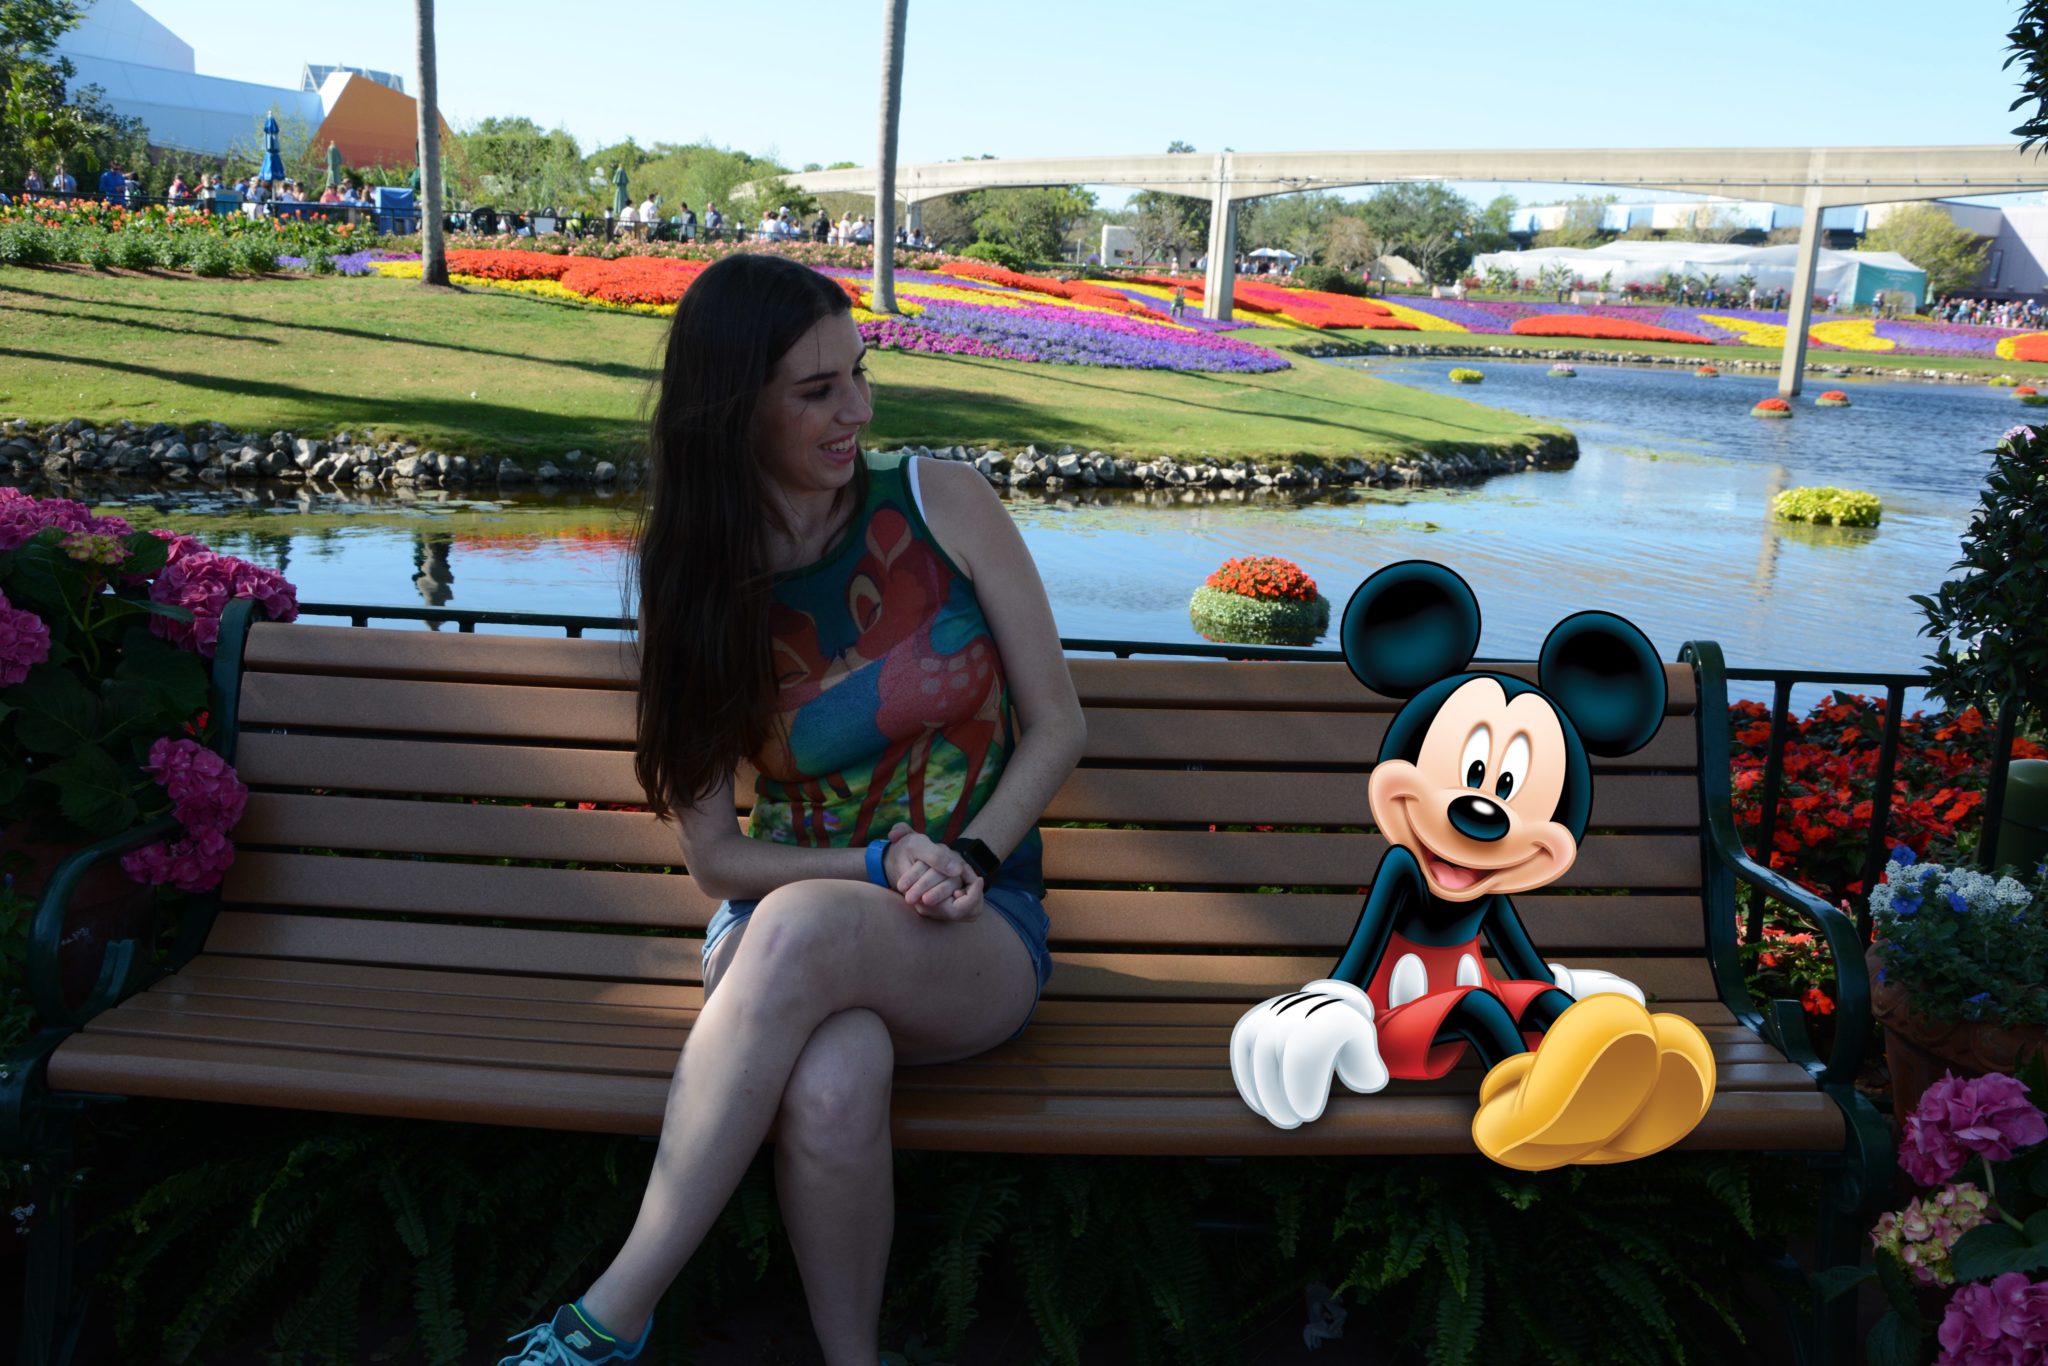 Chelsea sitting on a bench with Mickey Mouse at Epcot in front of the flower beds.